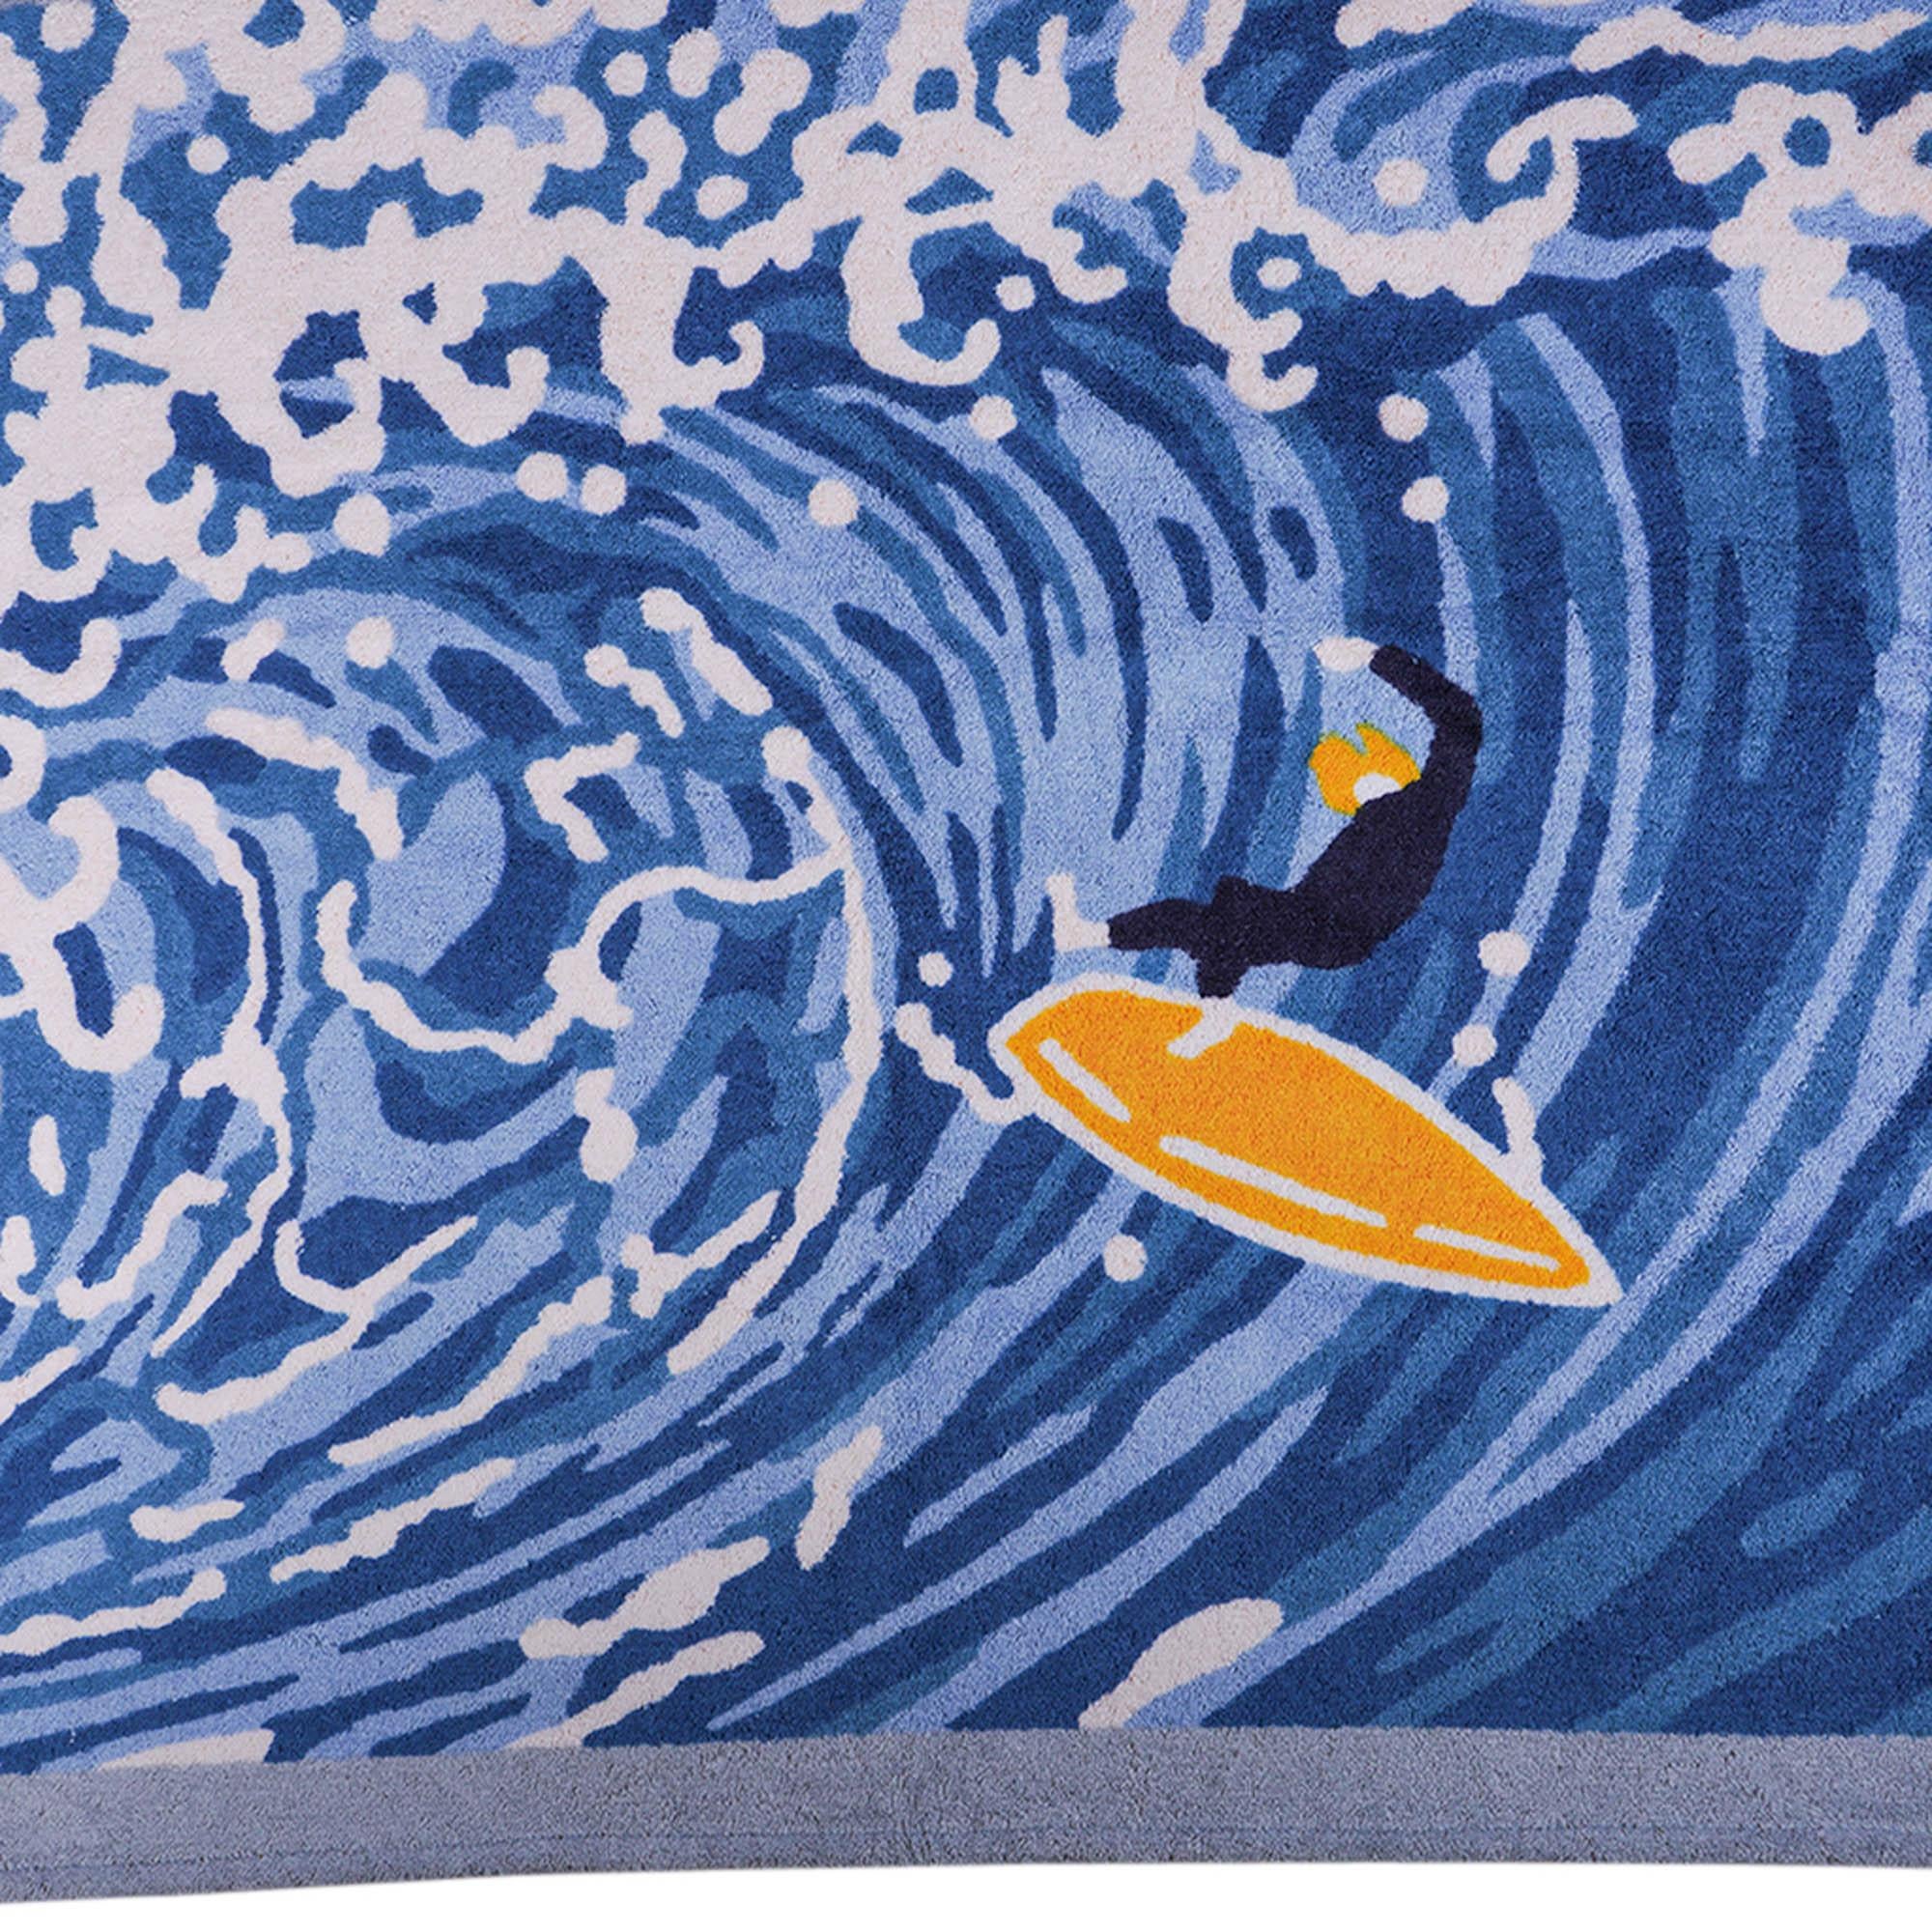 Mightychic offers an Hermes Wave Beach Towel featured in Denim.
Depicts the endless struggle of surfer and the sea. 
Designed by Daiske Nomura.
Reverses to solid orange.
Woven in Germany and screen printed in France.
New or Store Fresh